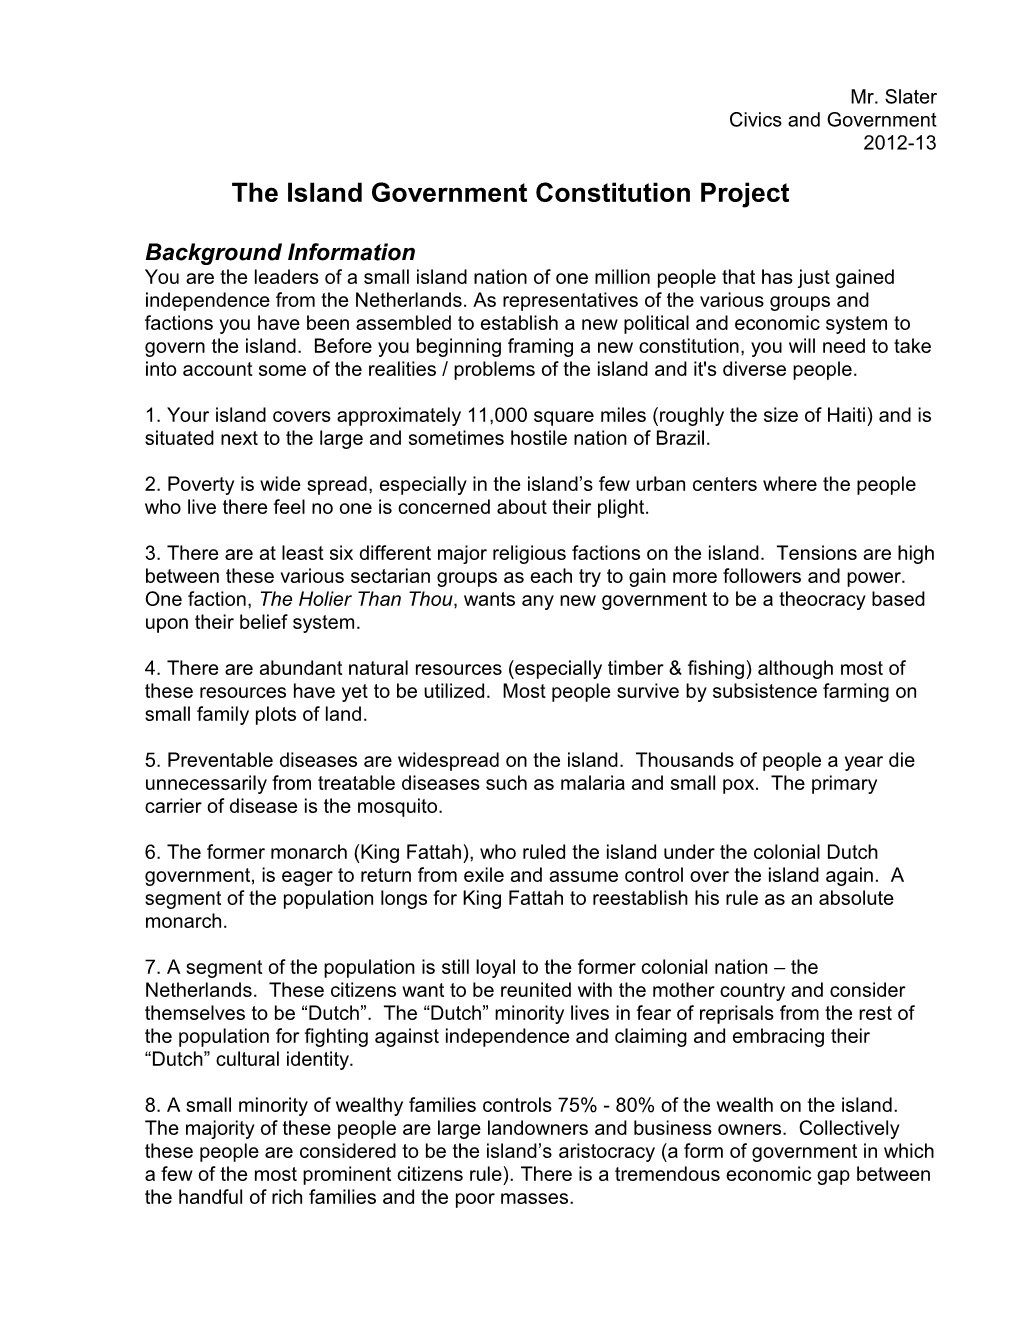 The Island Government Constitution Project